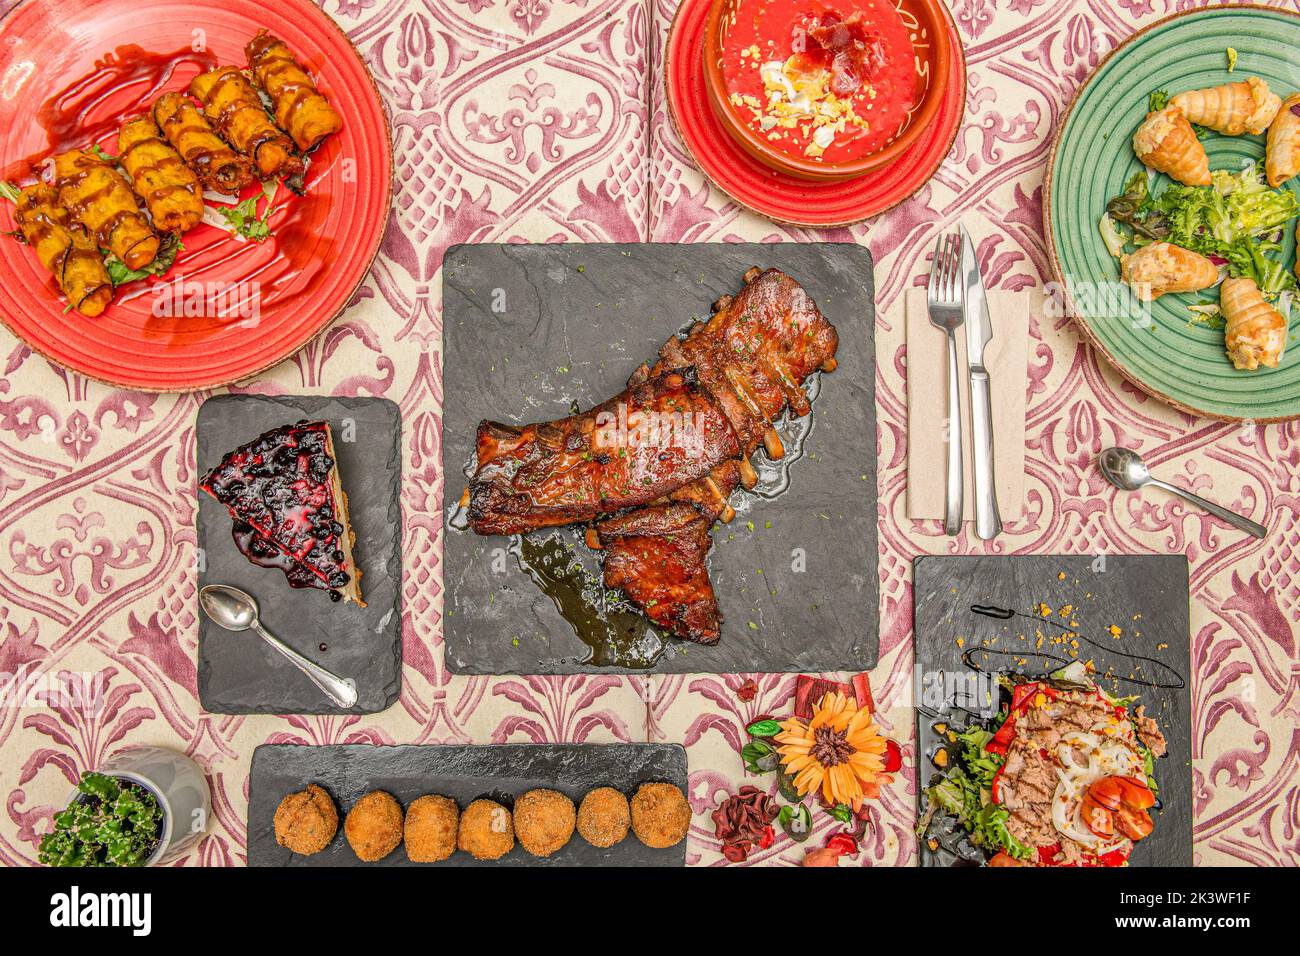 Several plates of food with croquettes, cones with salad, salmorejo, barbecue ribs, lemon cake and Russian salad with tomato and canned tuna Stock Photo